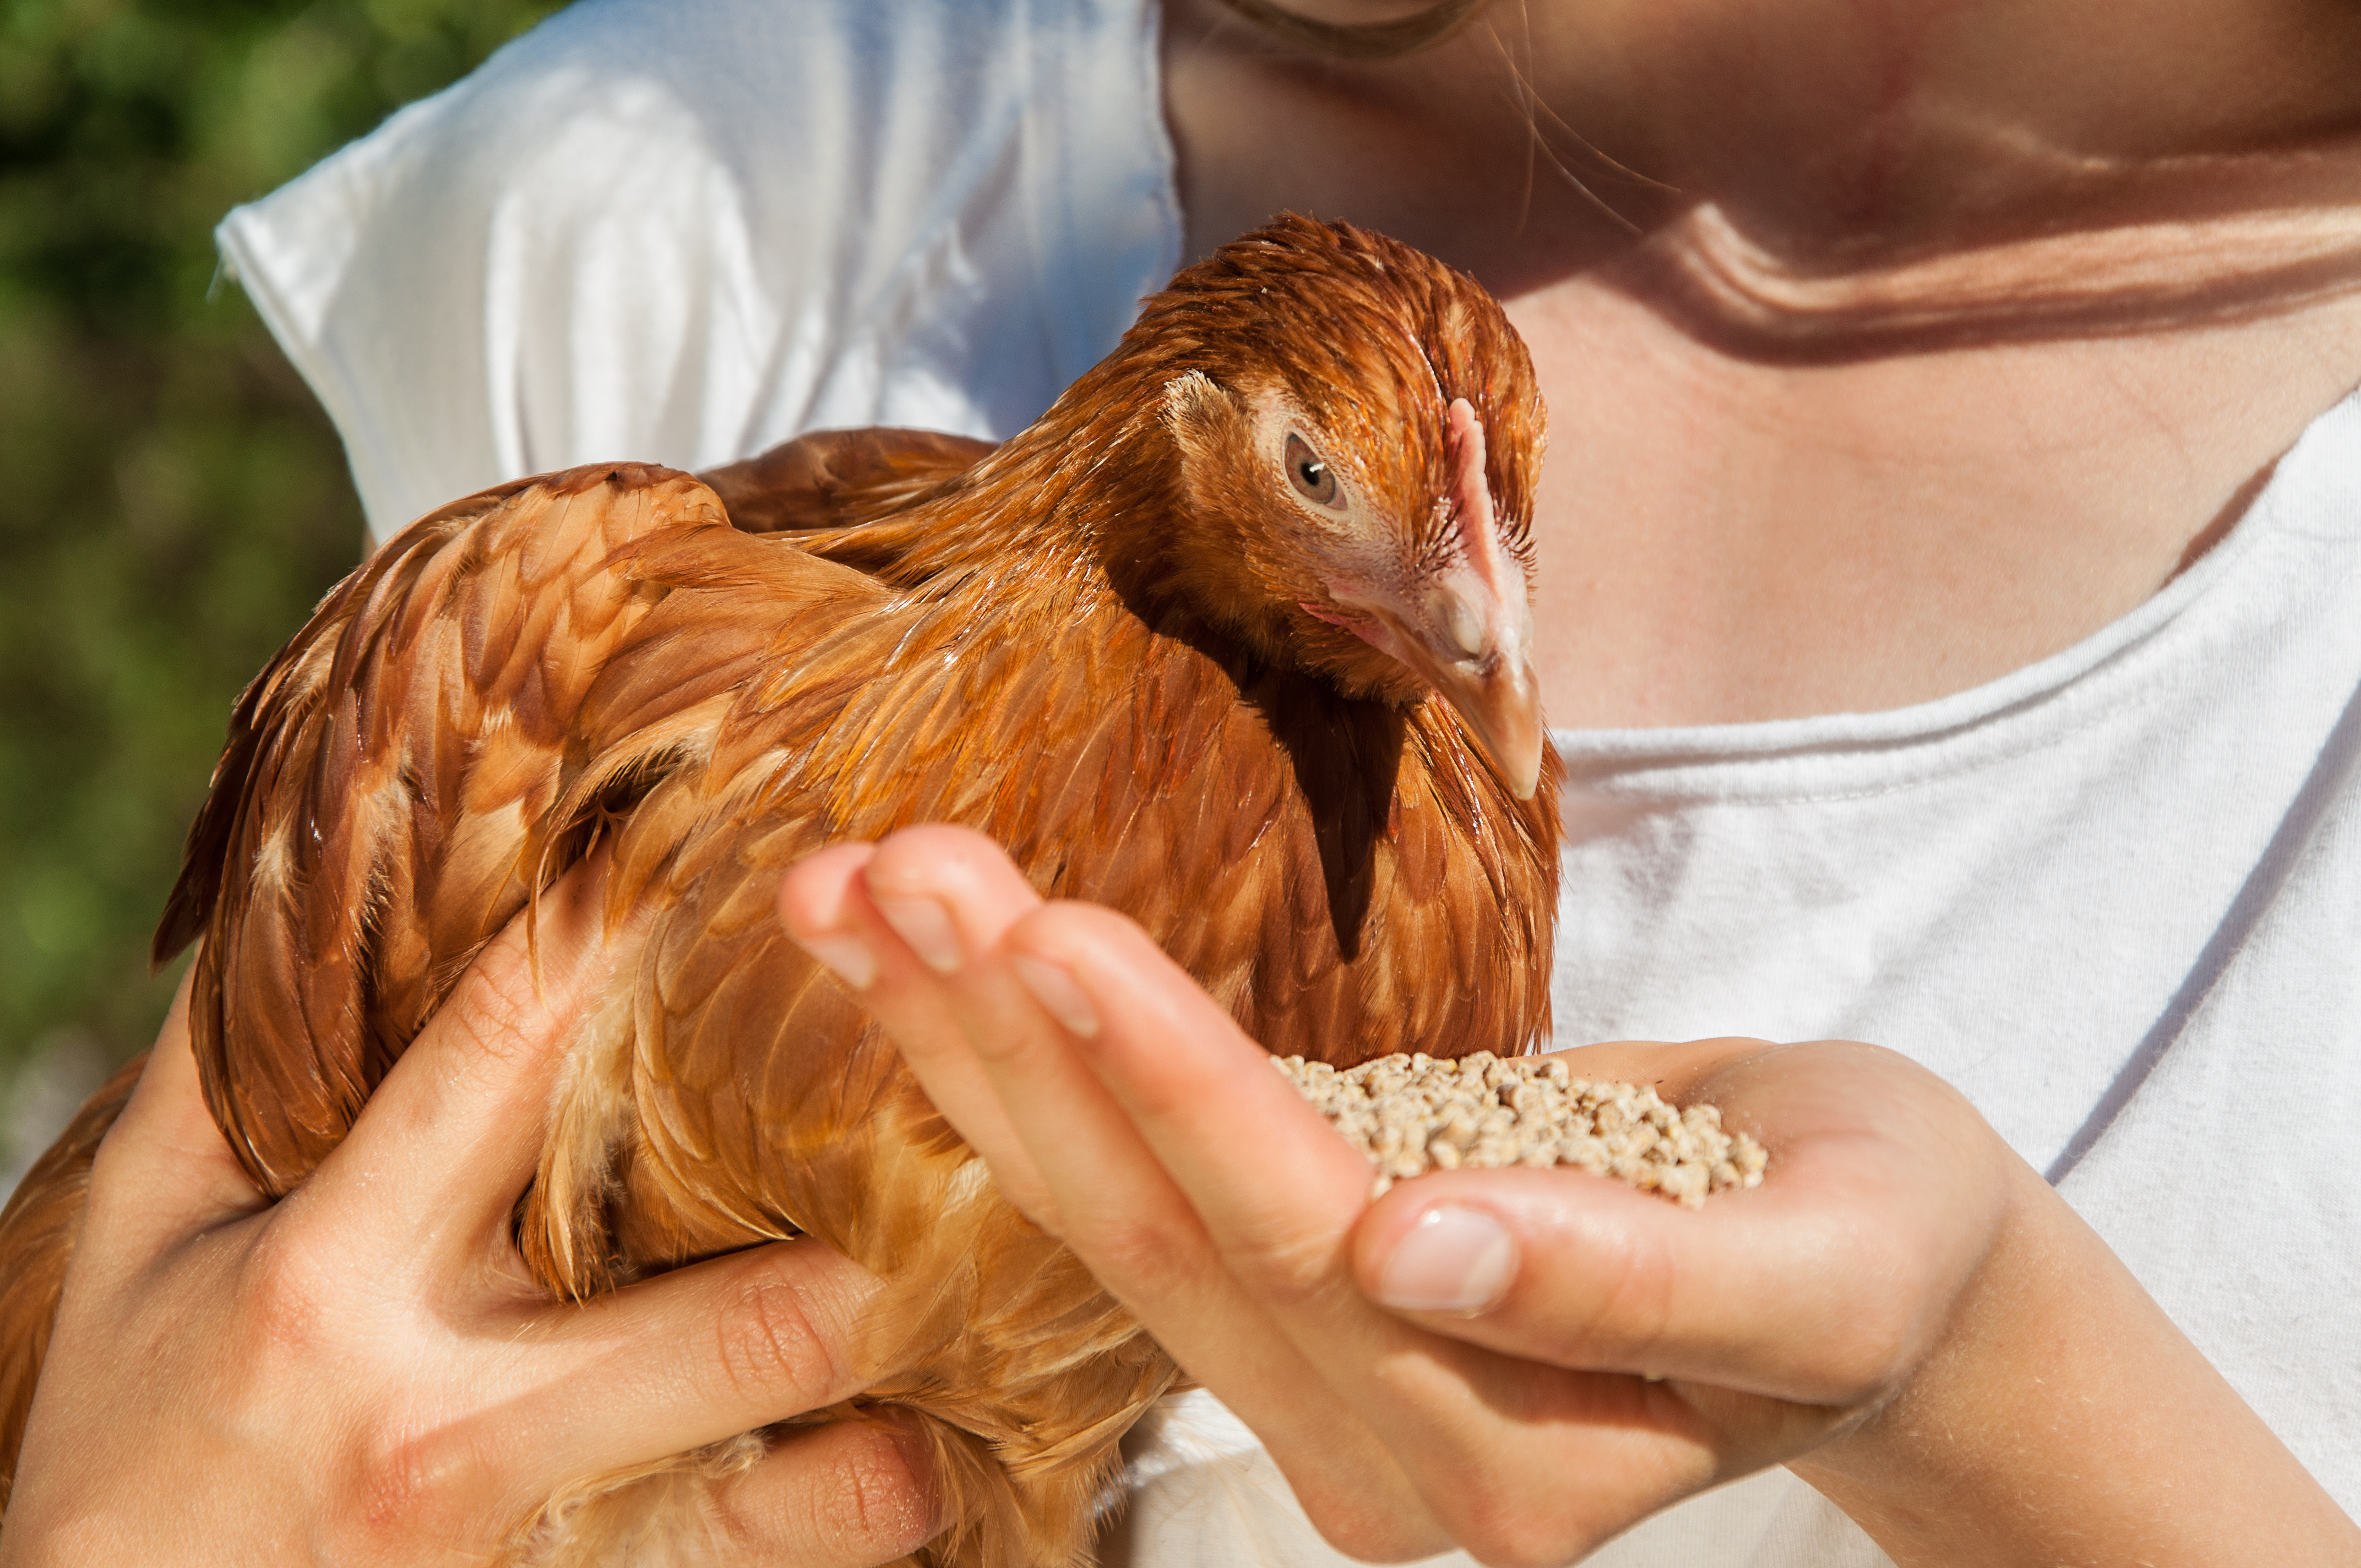 Chicken being encouraged to be handfed by owner.